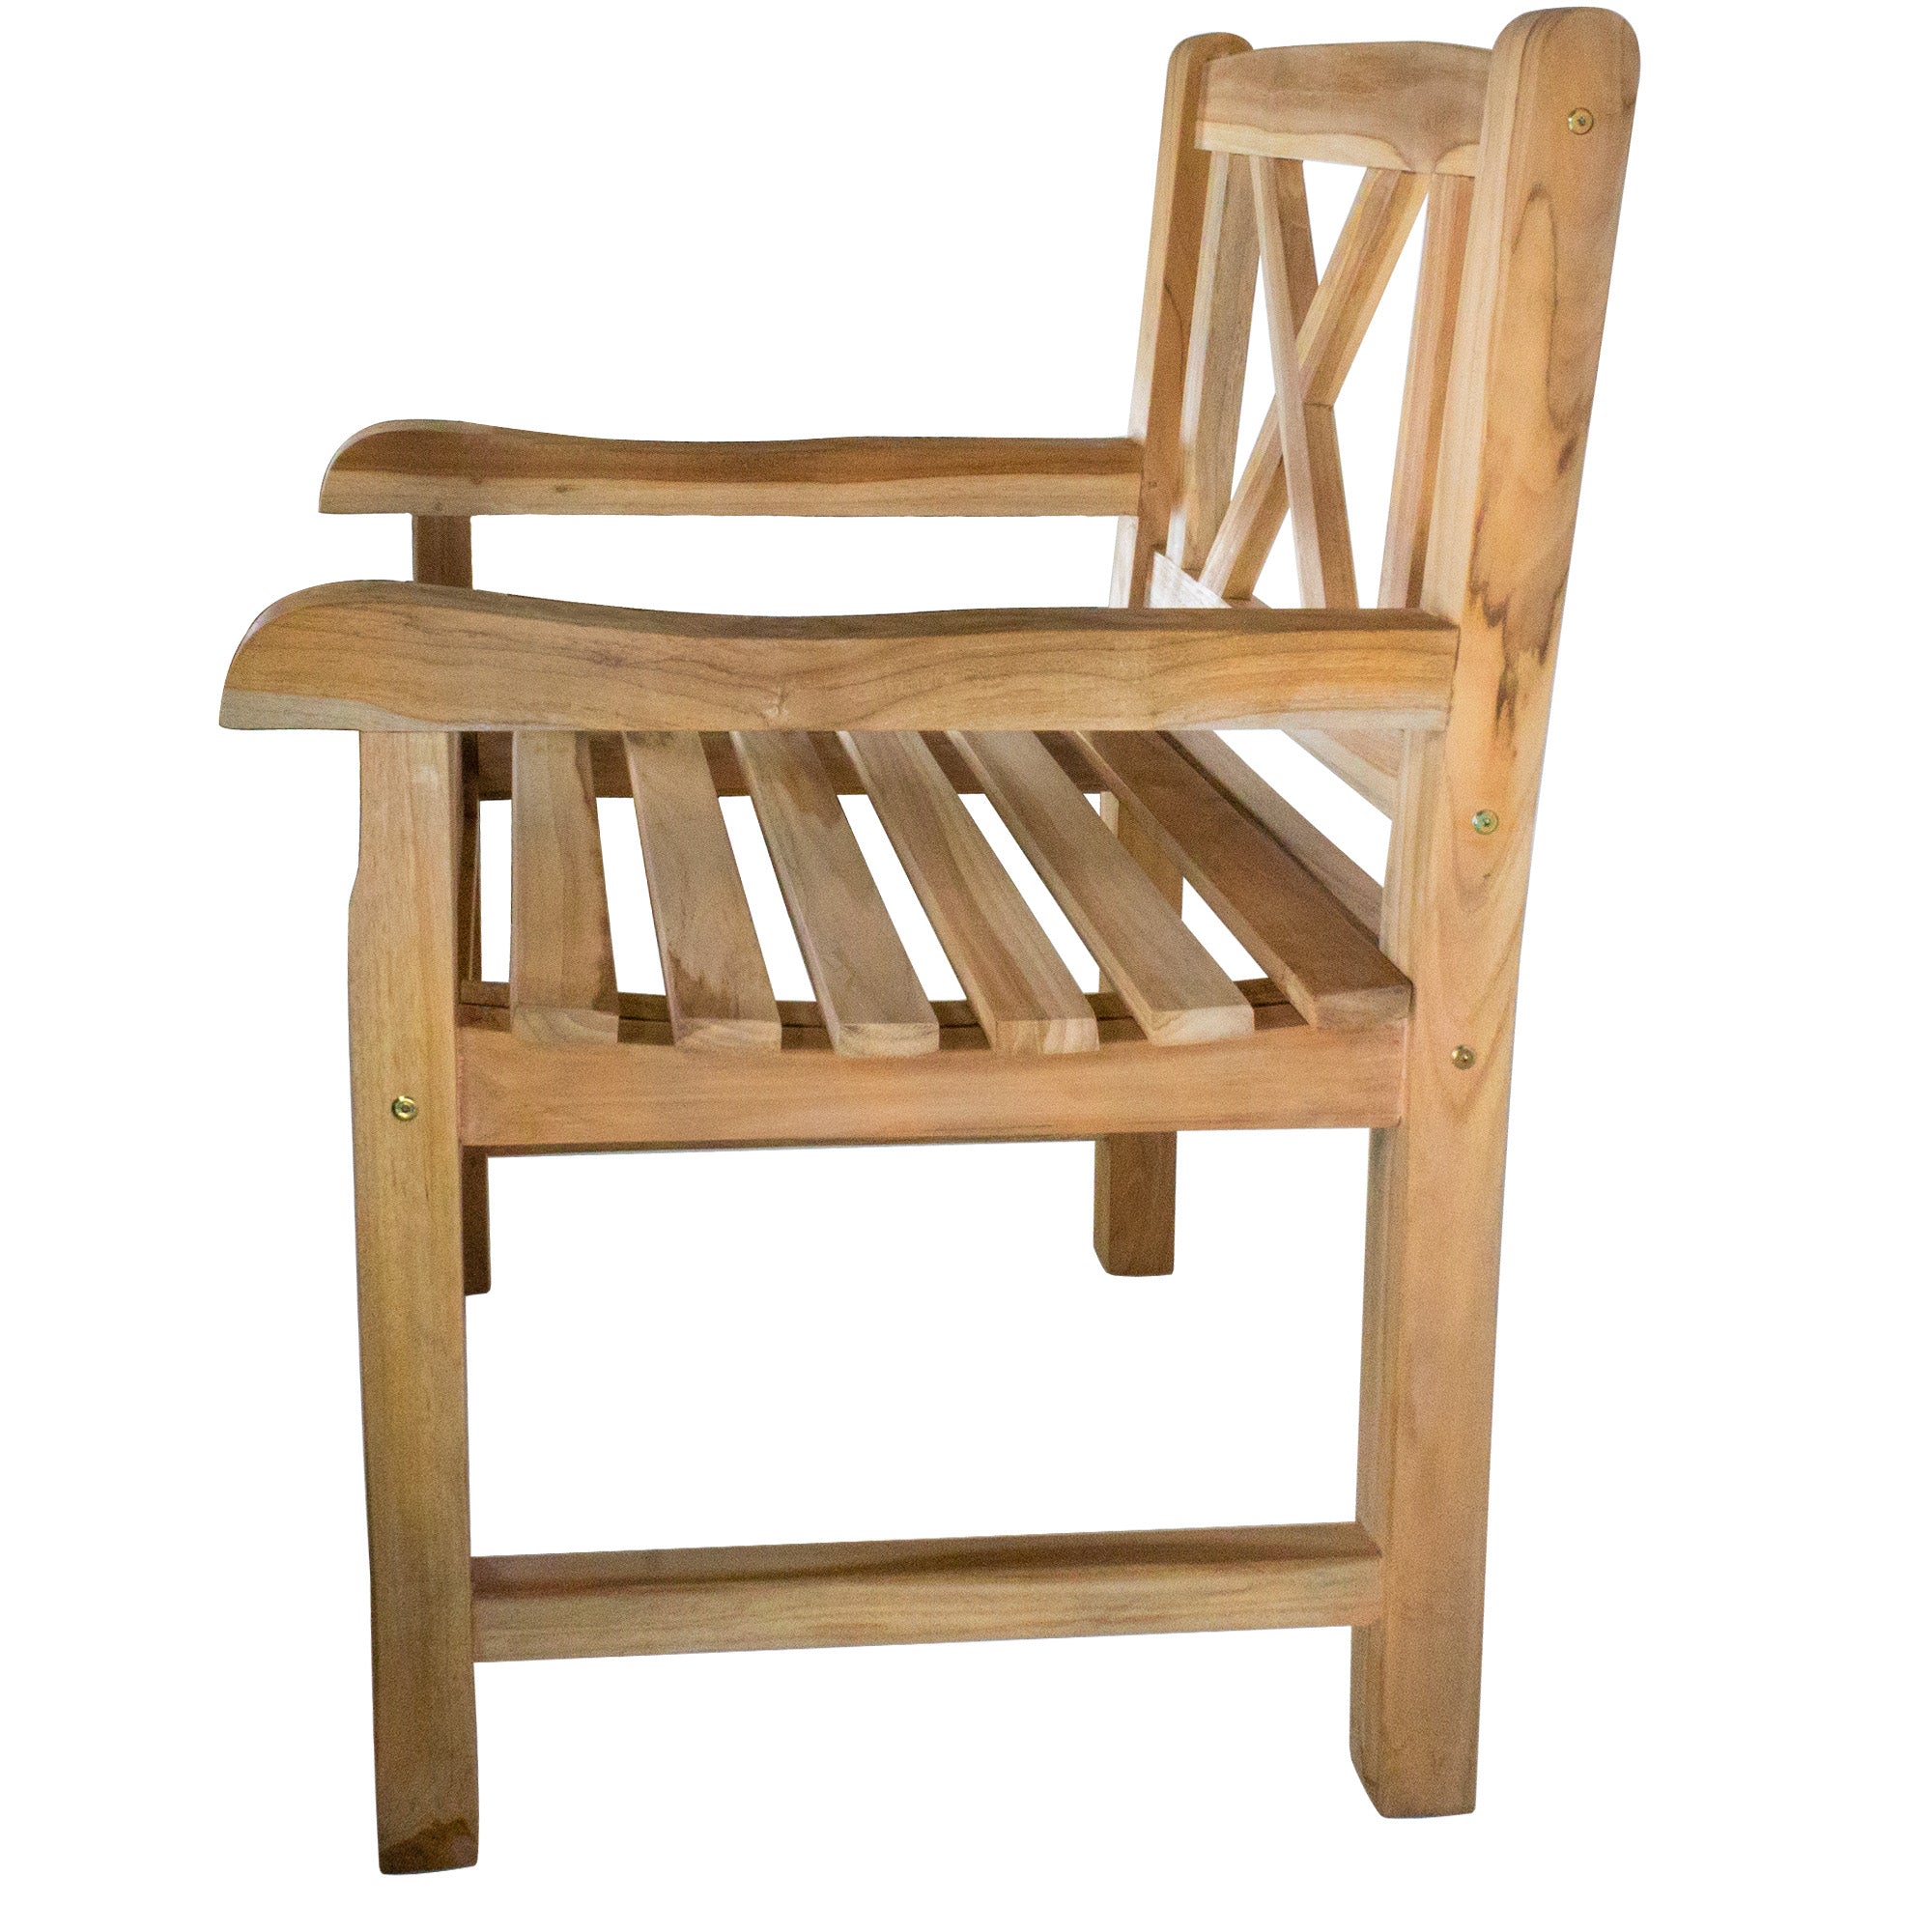 Stockholm Natural Teak Outdoor Patio Dining Chair with Arm Rests